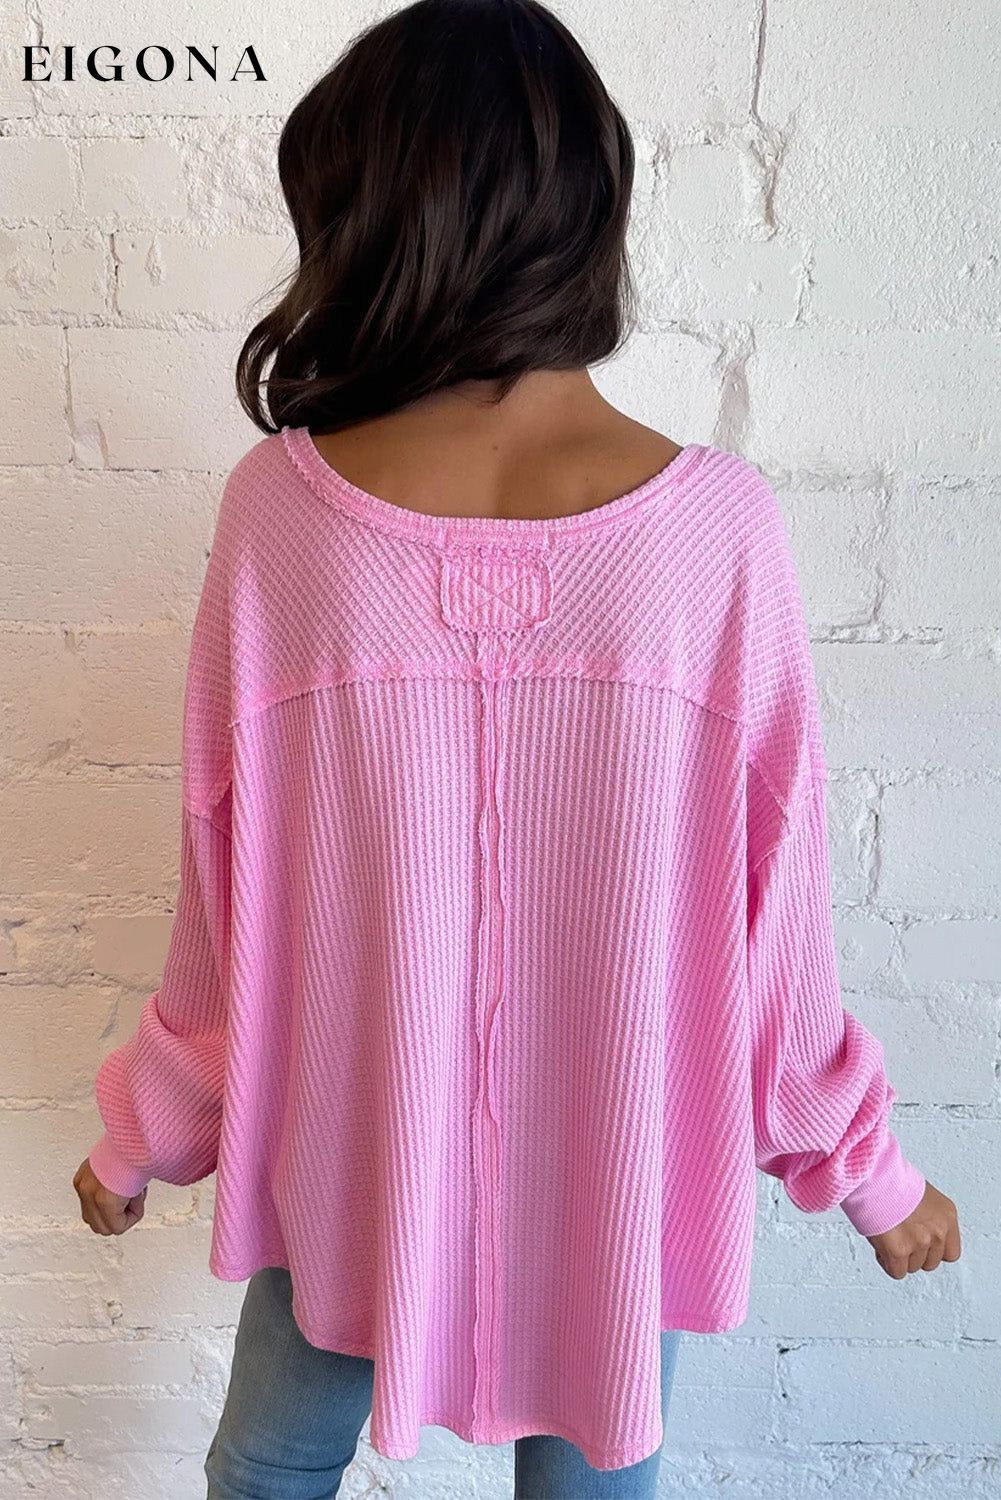 Bonbon Waffle Knit Exposed Seam High Low Top clothes Sweater sweaters